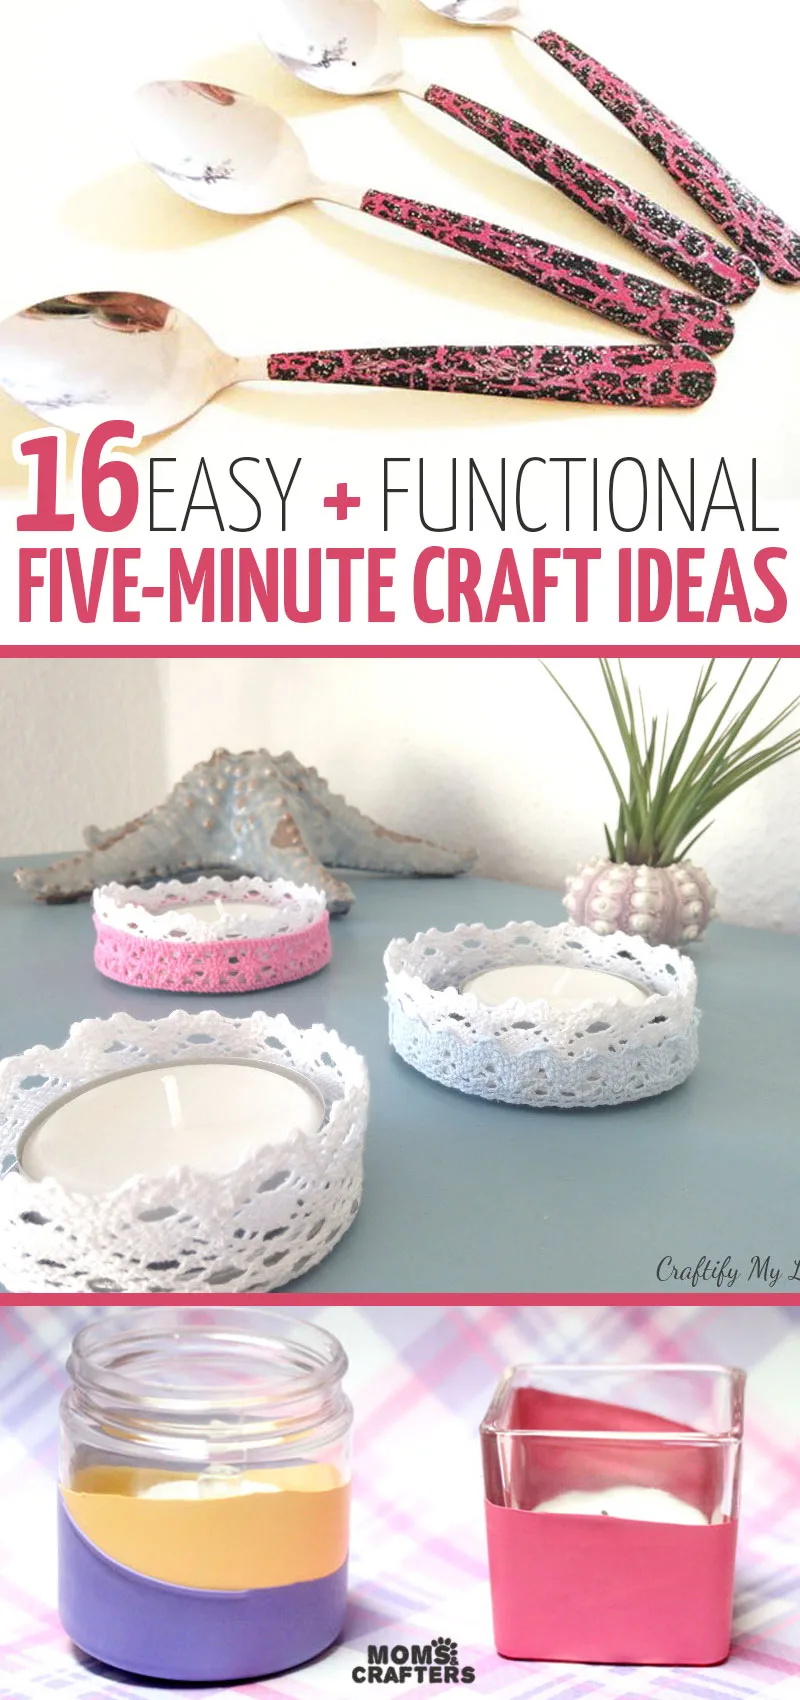 Click for the ultimate list of five minute crafts - DIY projects that you can make in 5 minutes or less! This includes home decor crafts, DIY toys, kids crafts, paper crafts, and more quick and easy craft tutorials for beginners. #crafts #diy